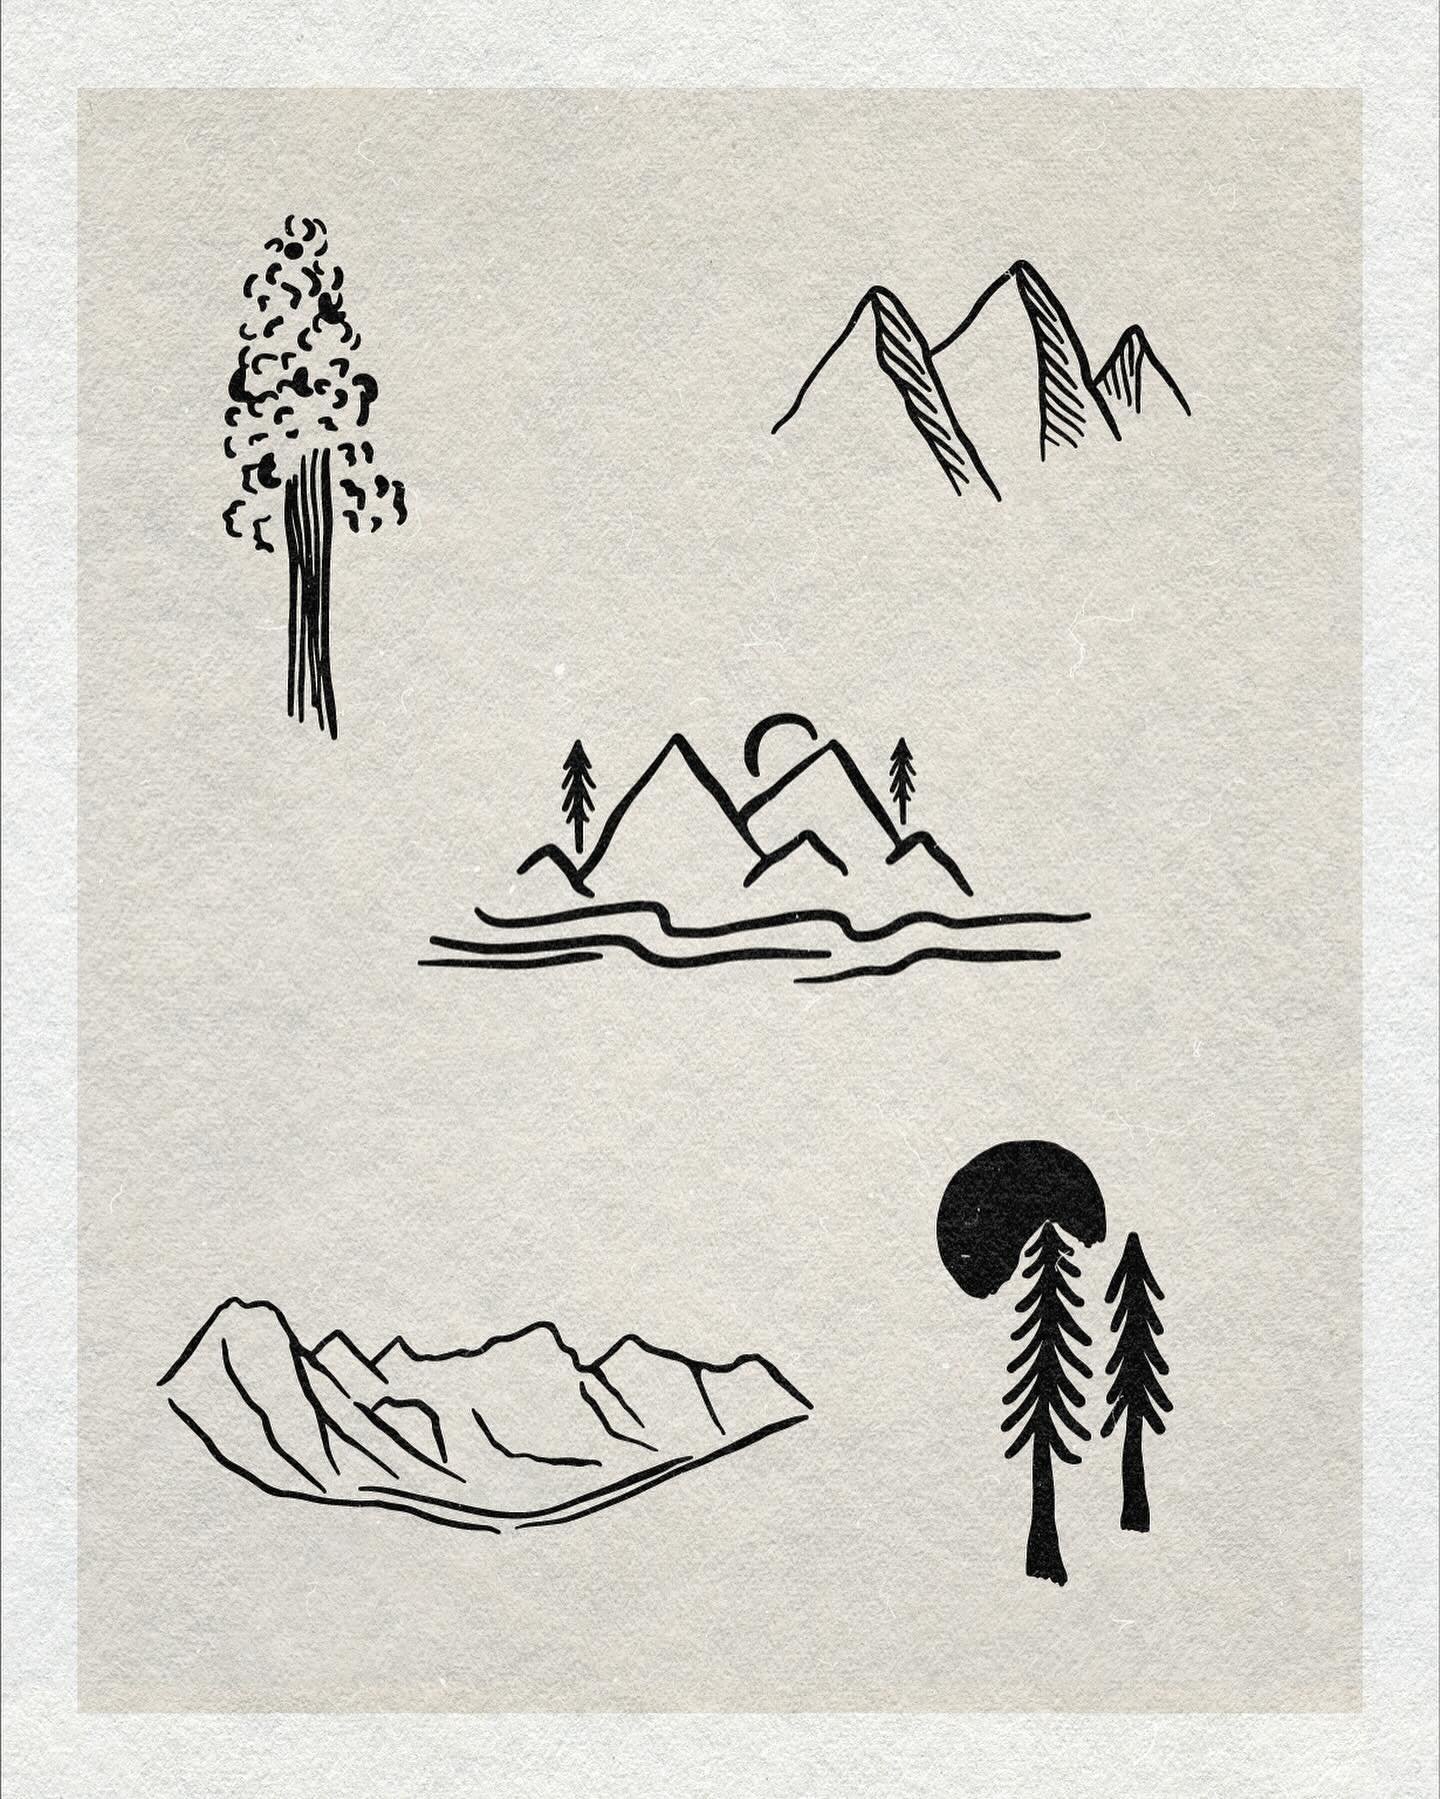 Some Rocky Mountain details in the works for a client 🏔️ Any time I get the chance to infuse Colorado into a design makes my heart happy.